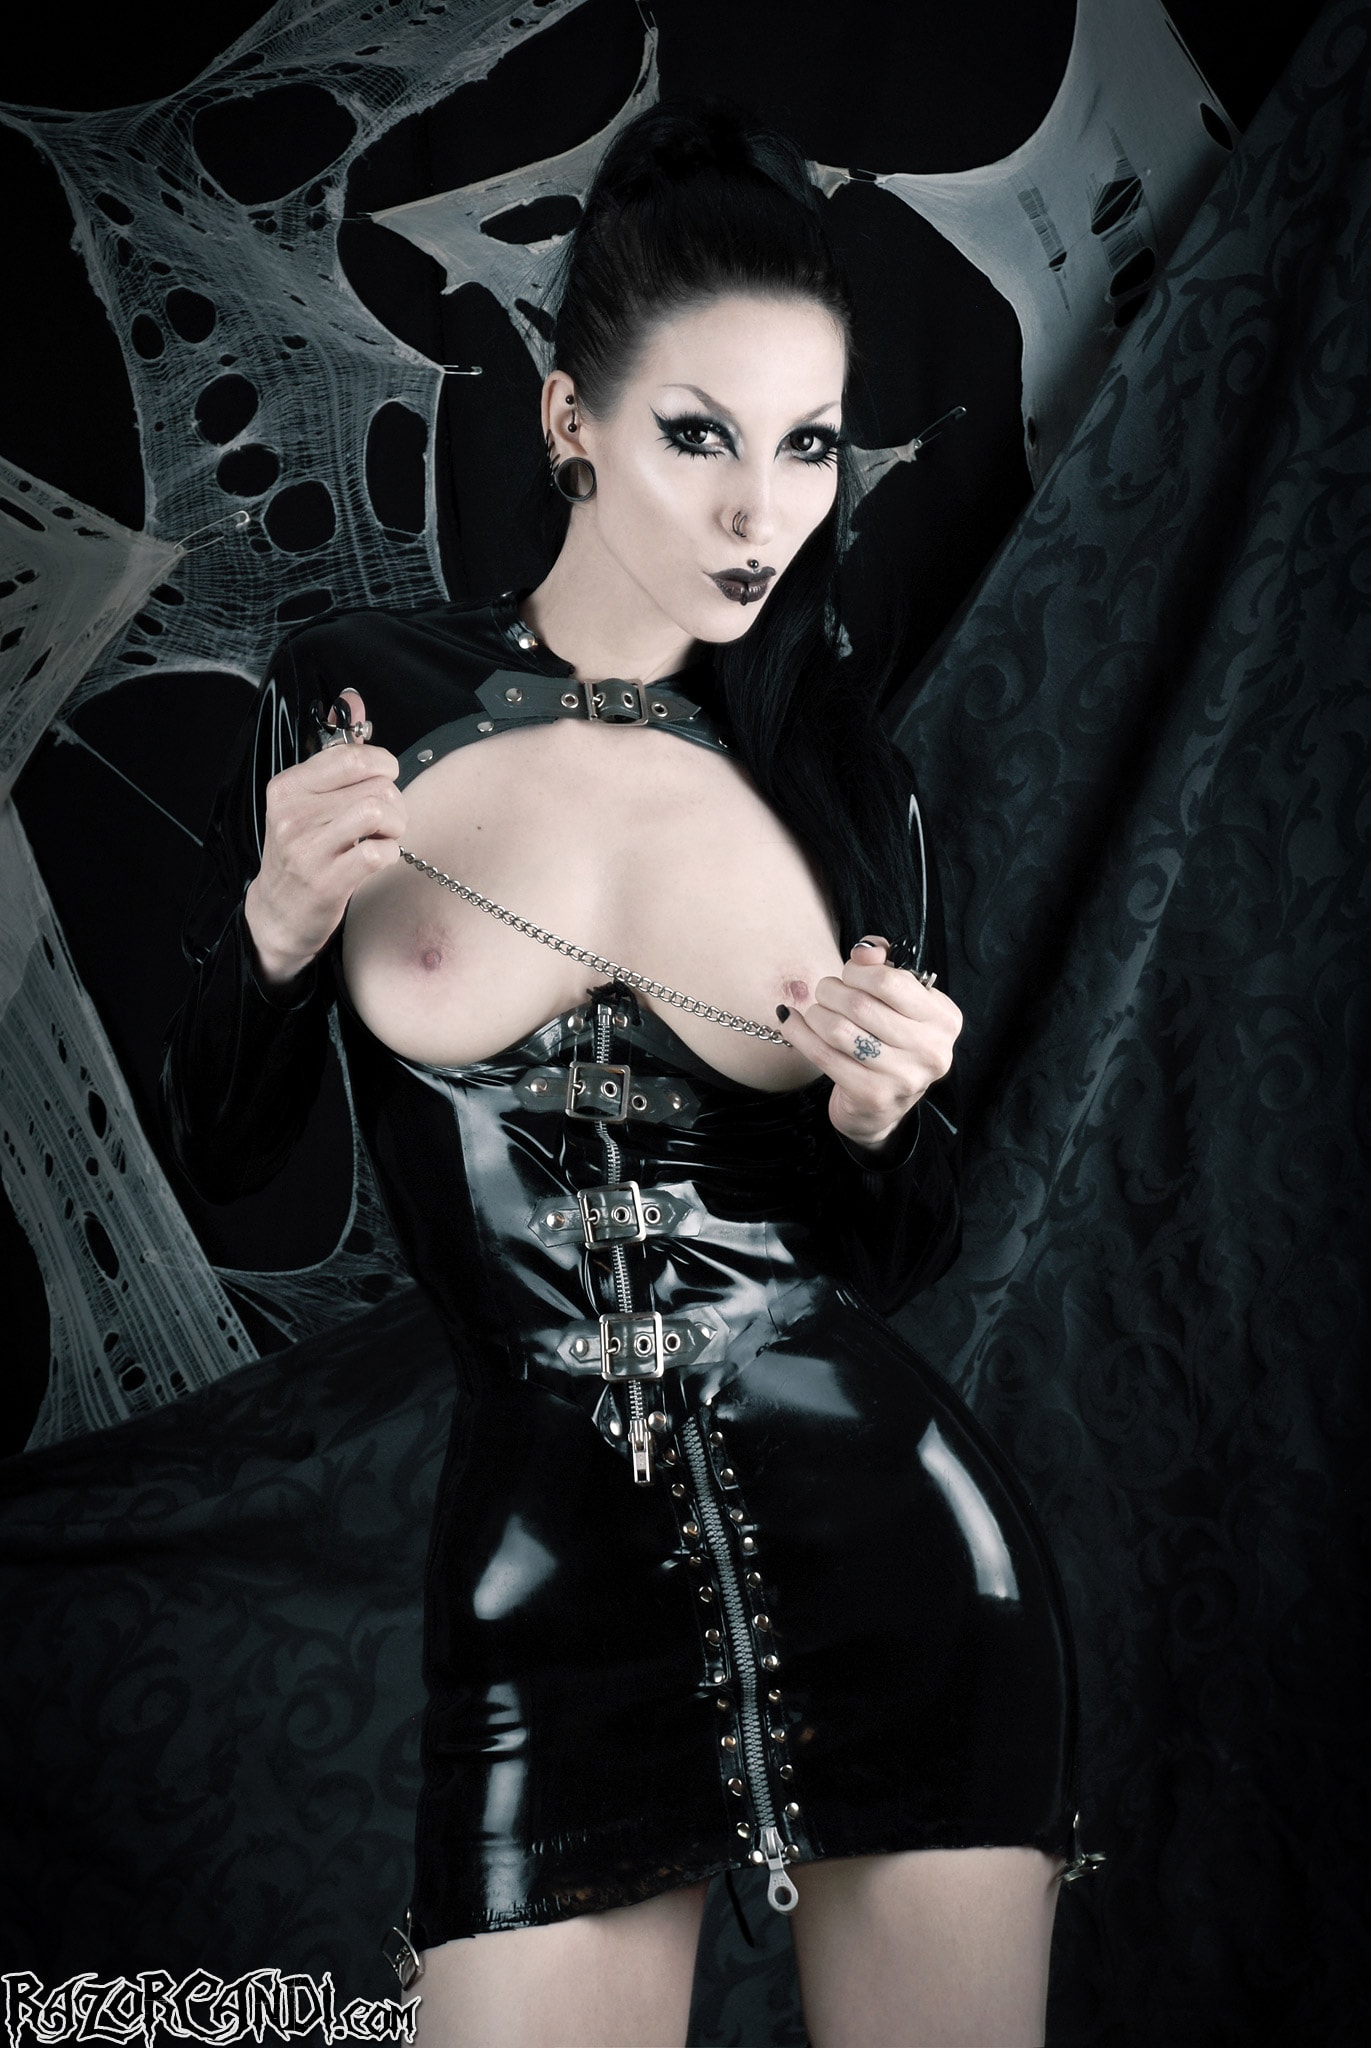 Razor Candi - Goth fetish babe in latex with nipple-clamps Picture (12) .